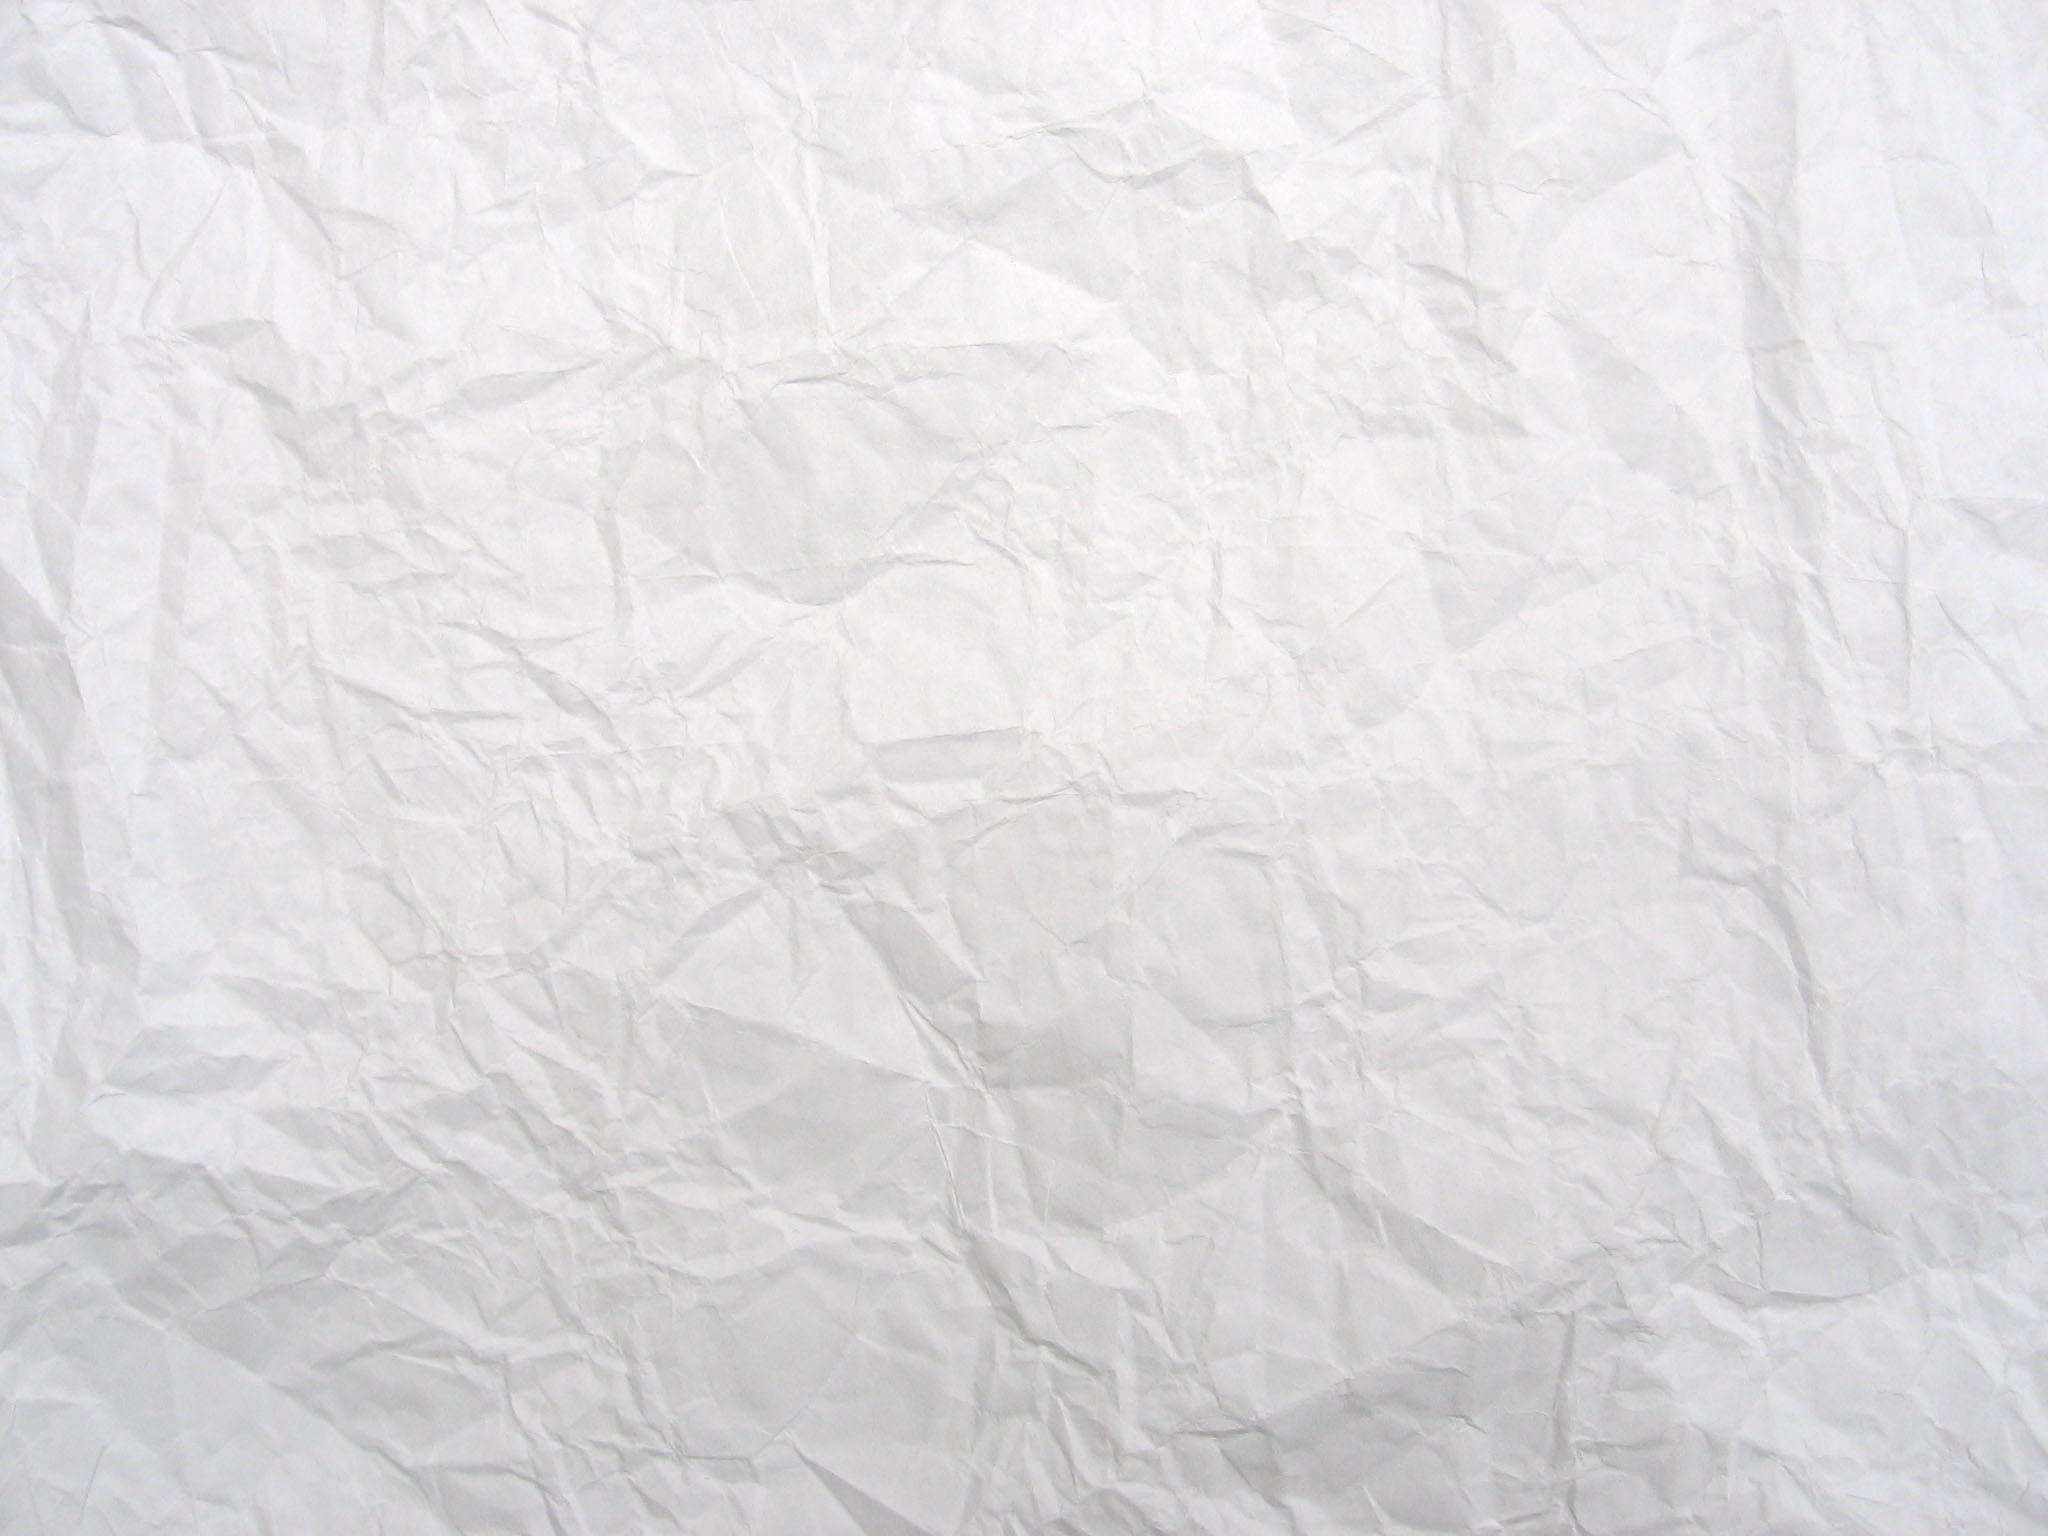 2048x1536 a paper structure, paper texture, the old rumpled paper to download a photo,